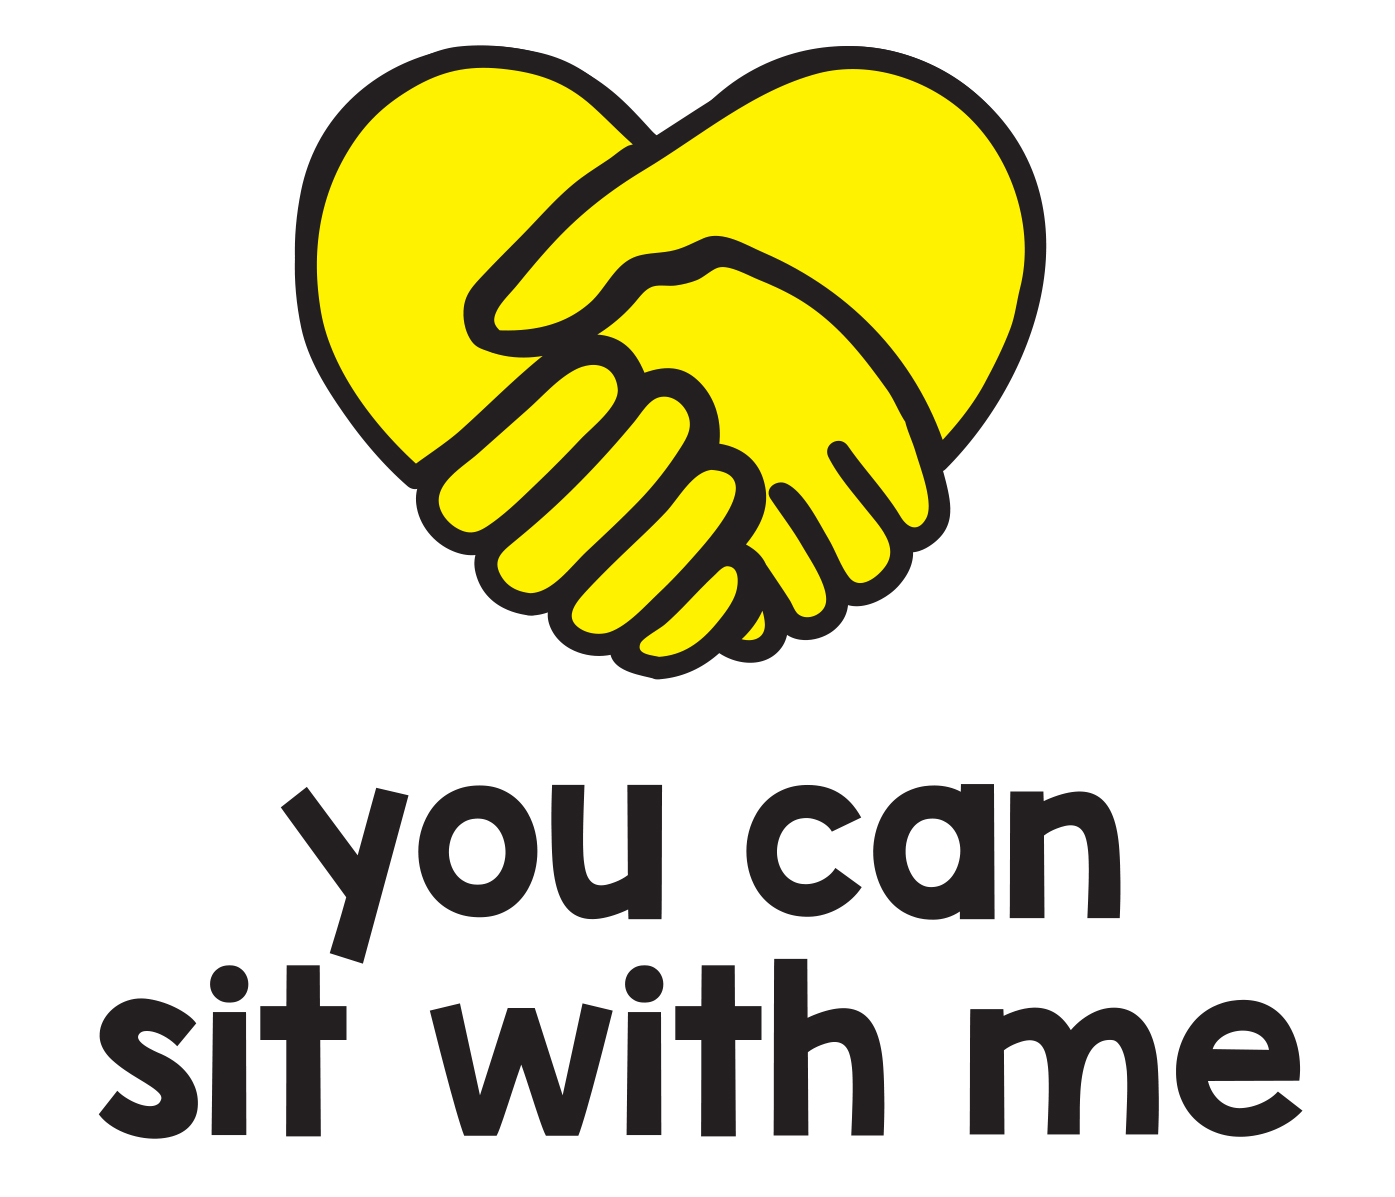 You can sit with me campaign